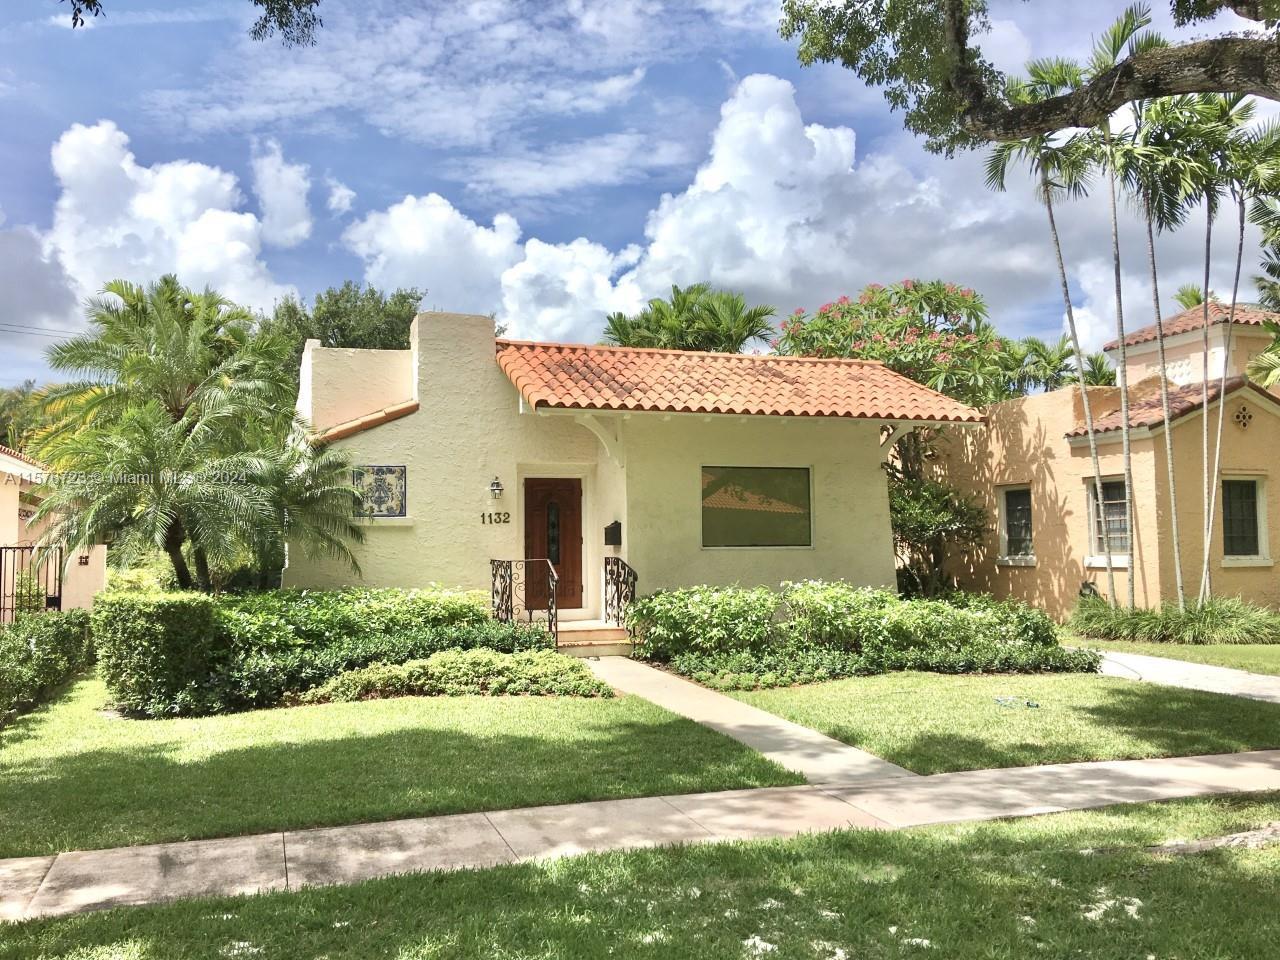 Photo of 1132 Castile Ave in Coral Gables, FL